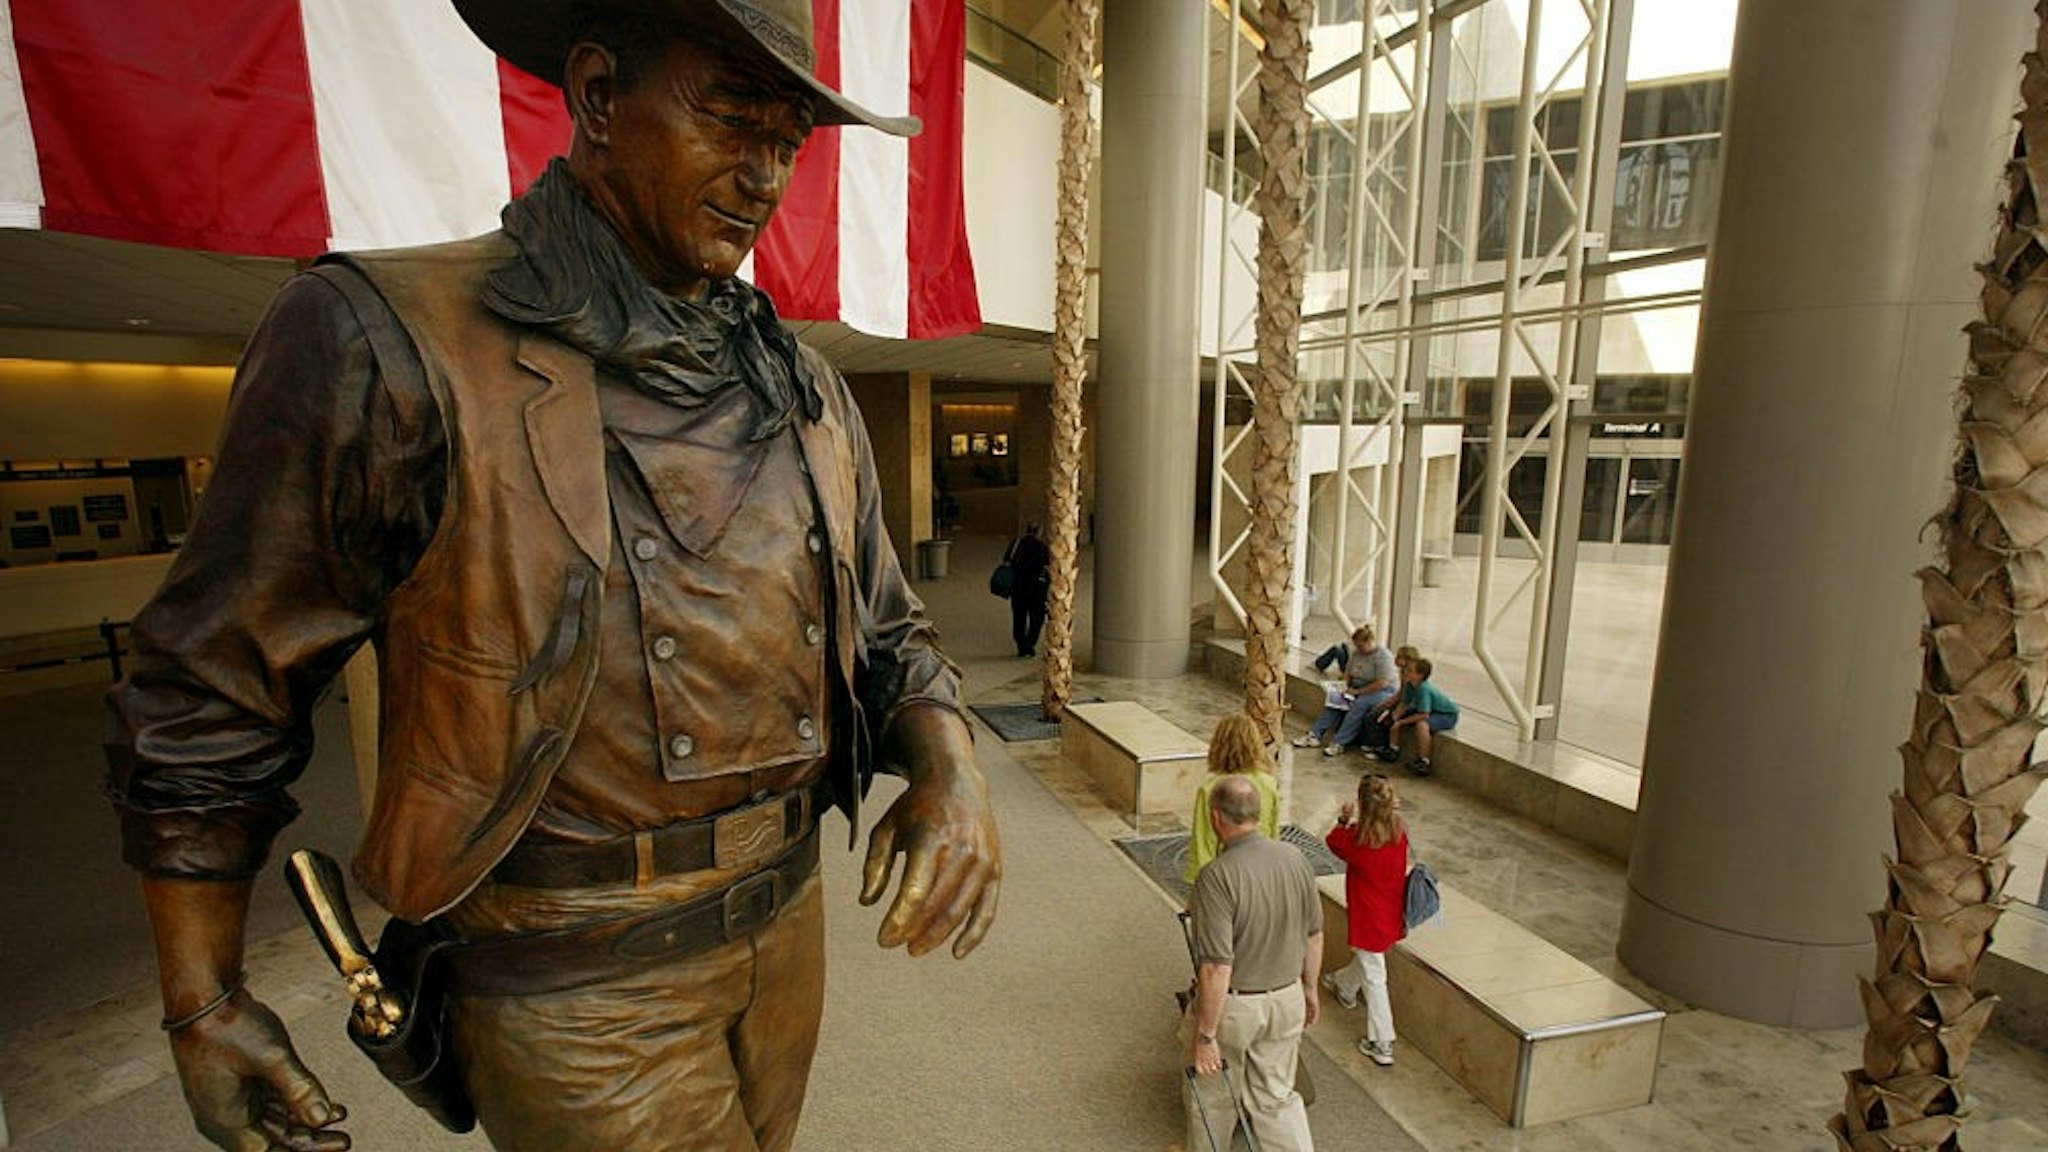 (Santa Ana) Passengers file by the statue of John Wayne at John Wayne Airport. There s a proposal floating around to change the name of John Wayne Airport to the O.C. What do people have to say? Photo taken Tuesday June 8, 2004. (Photo by